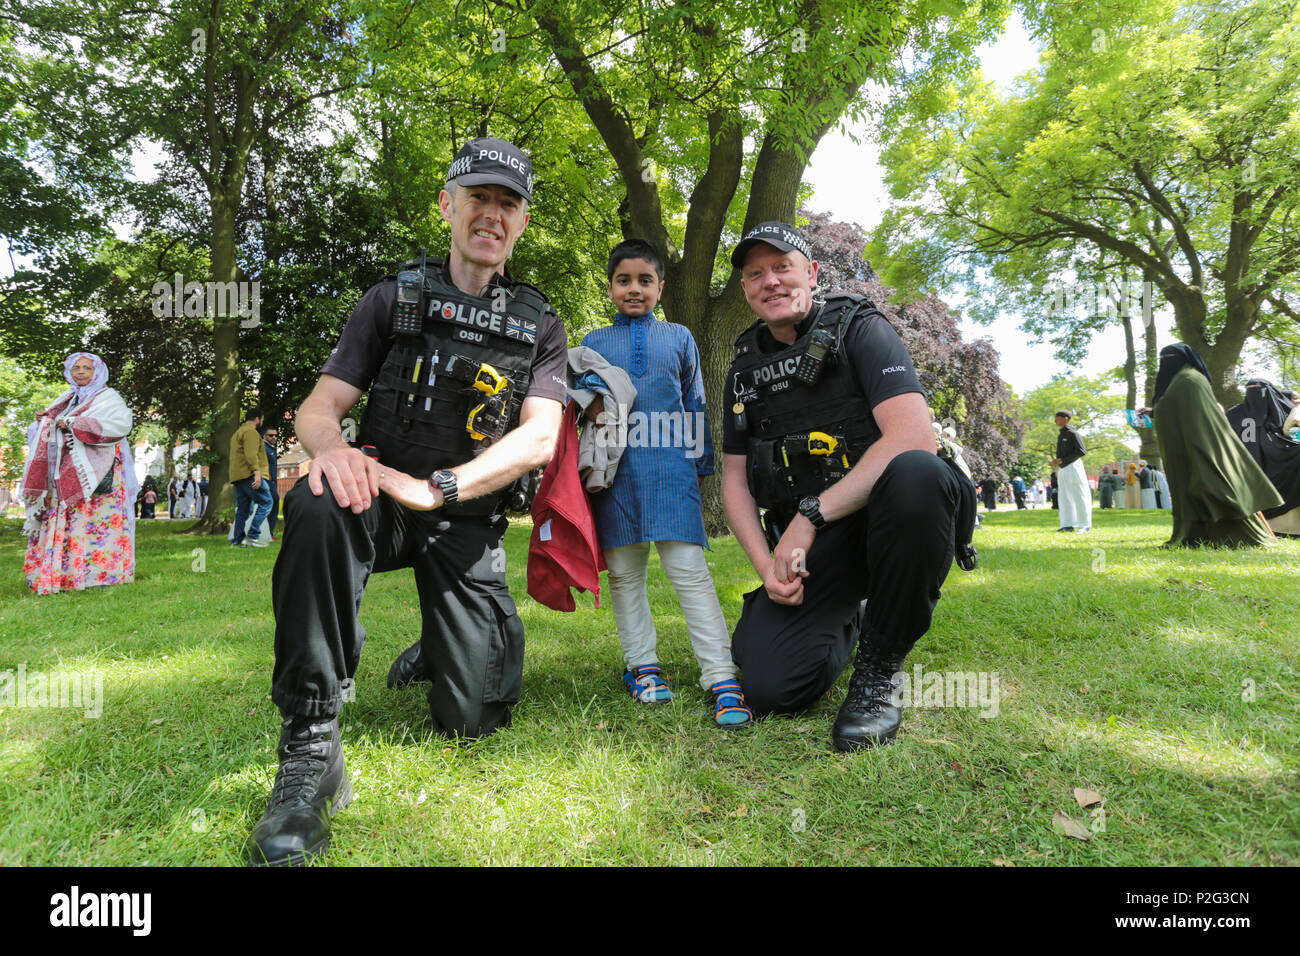 Birmingham, UK. 15th June, 2018. Over 100,000 muslims gather in Small Heath park, Birmingham, to pray on the morning of Eid, the end of the fasting month of Ramadan. Police take time to pose with children Peter Lopeman/Alamy Live News Stock Photo